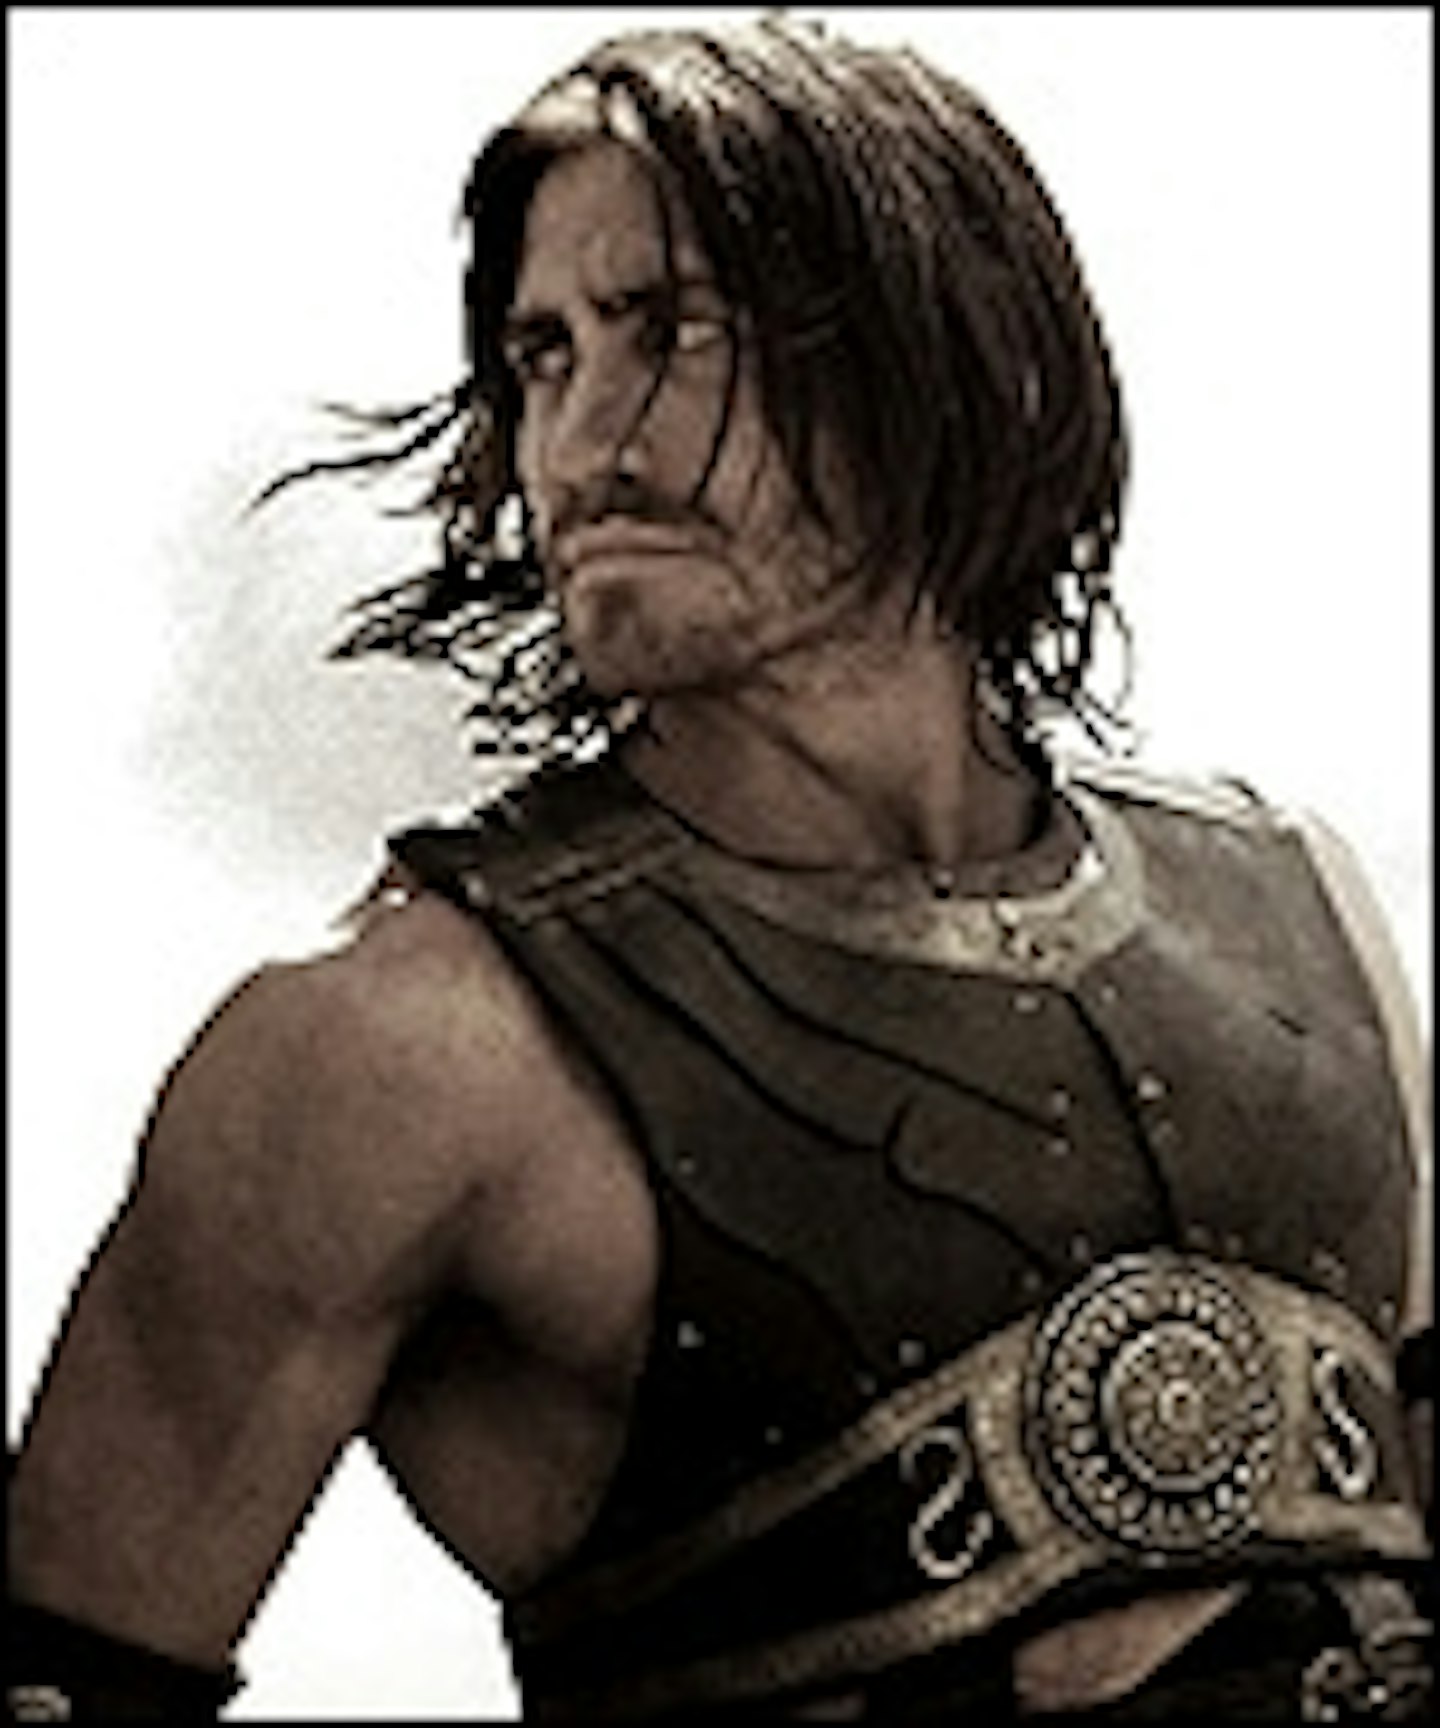 Prince of Persia Featurette Released